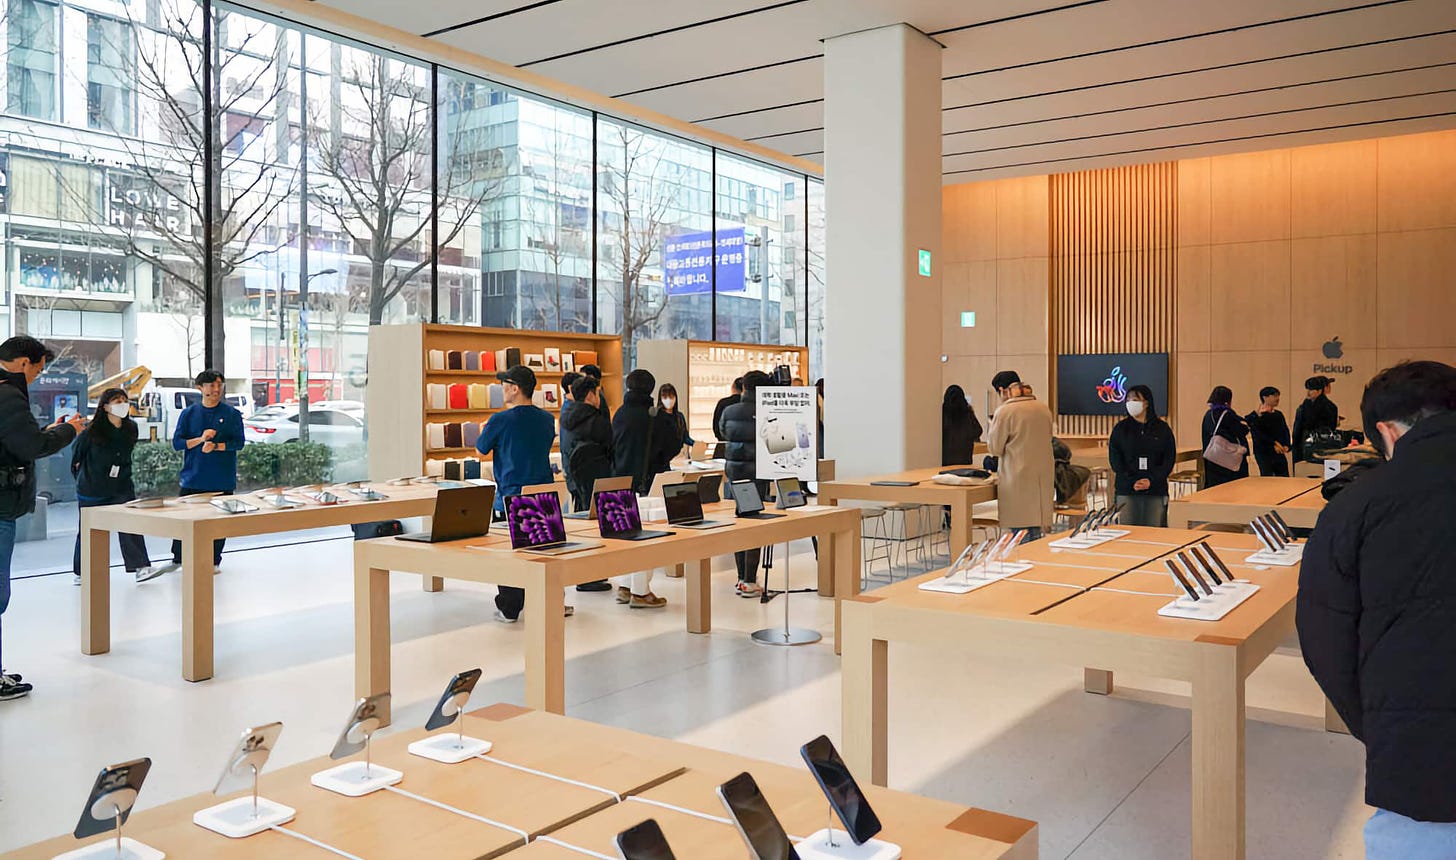 Product tables, freestanding Avenues, and large glass windows fill Apple Hongdae.